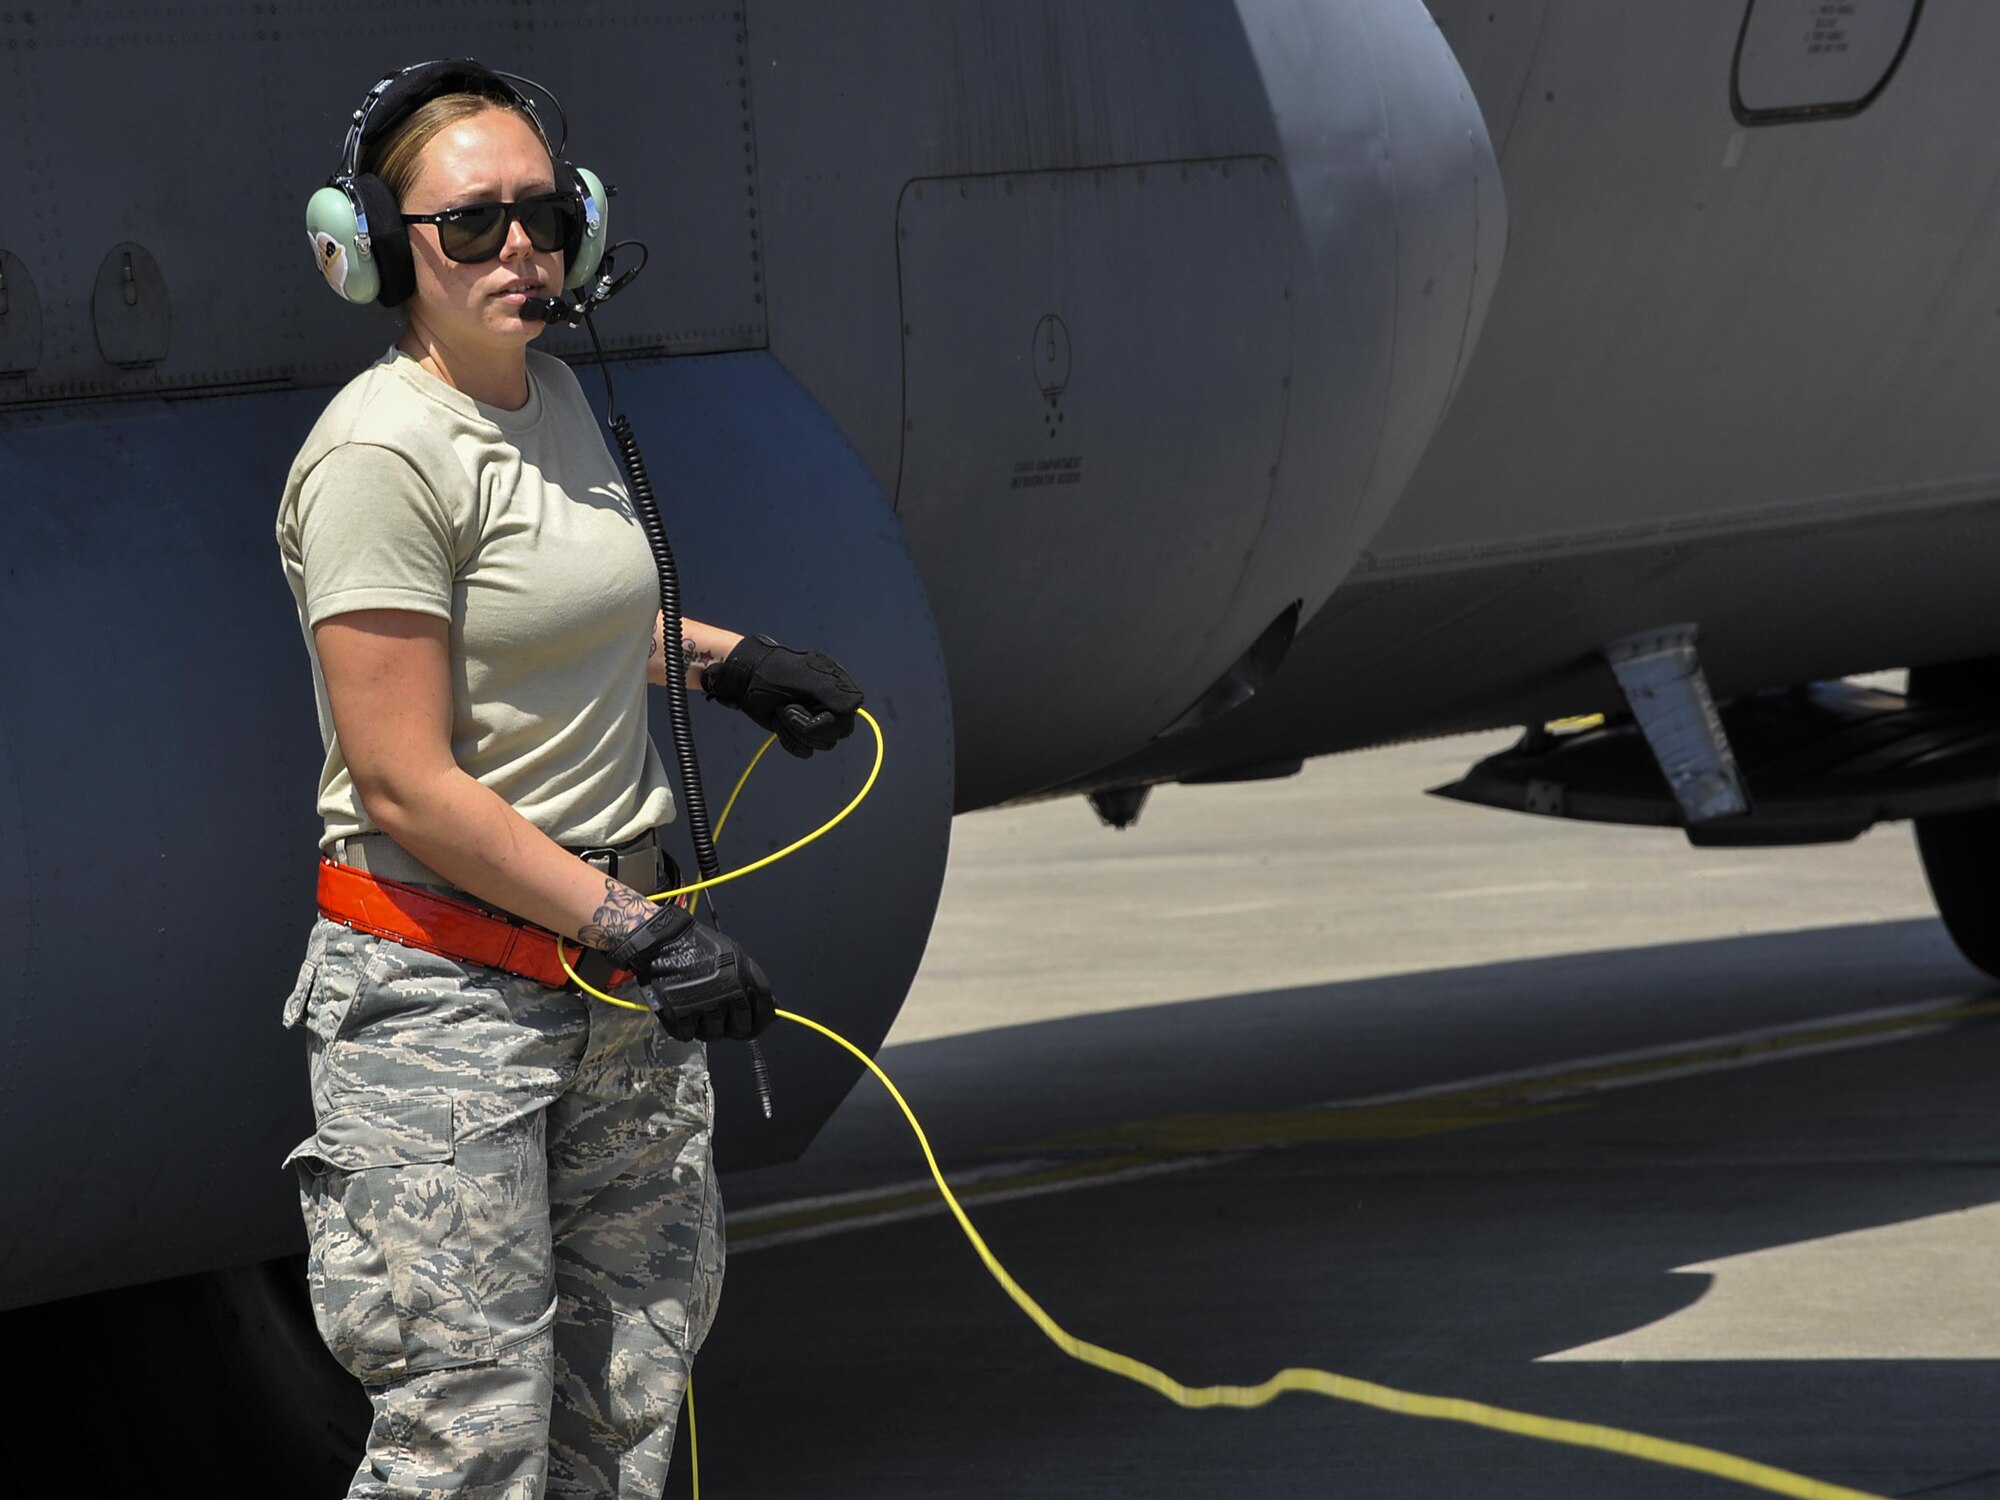 Staff Sgt. Chelsie Busbin, 317th Aircraft Maintenance Squadron flying crew chief, disconnects an aircraft and fuel truck after a refuel June 9, 2016, at Ramstein Air Base, Germany. More than 5,000 military members from 10 NATO countries are participating in this year’s annual Exercise Swift Response 2016  from May 27 through June 26. Swift Response is a joint, multinational-exercise designed to train the U.S. Global Response Force alongside high-readiness forces from Belgium, France, Germany, Italy, The Netherlands, Poland, Portugal, Spain and the United Kingdom. (U.S. Air Force photo/Senior Airman Larissa Greatwood)